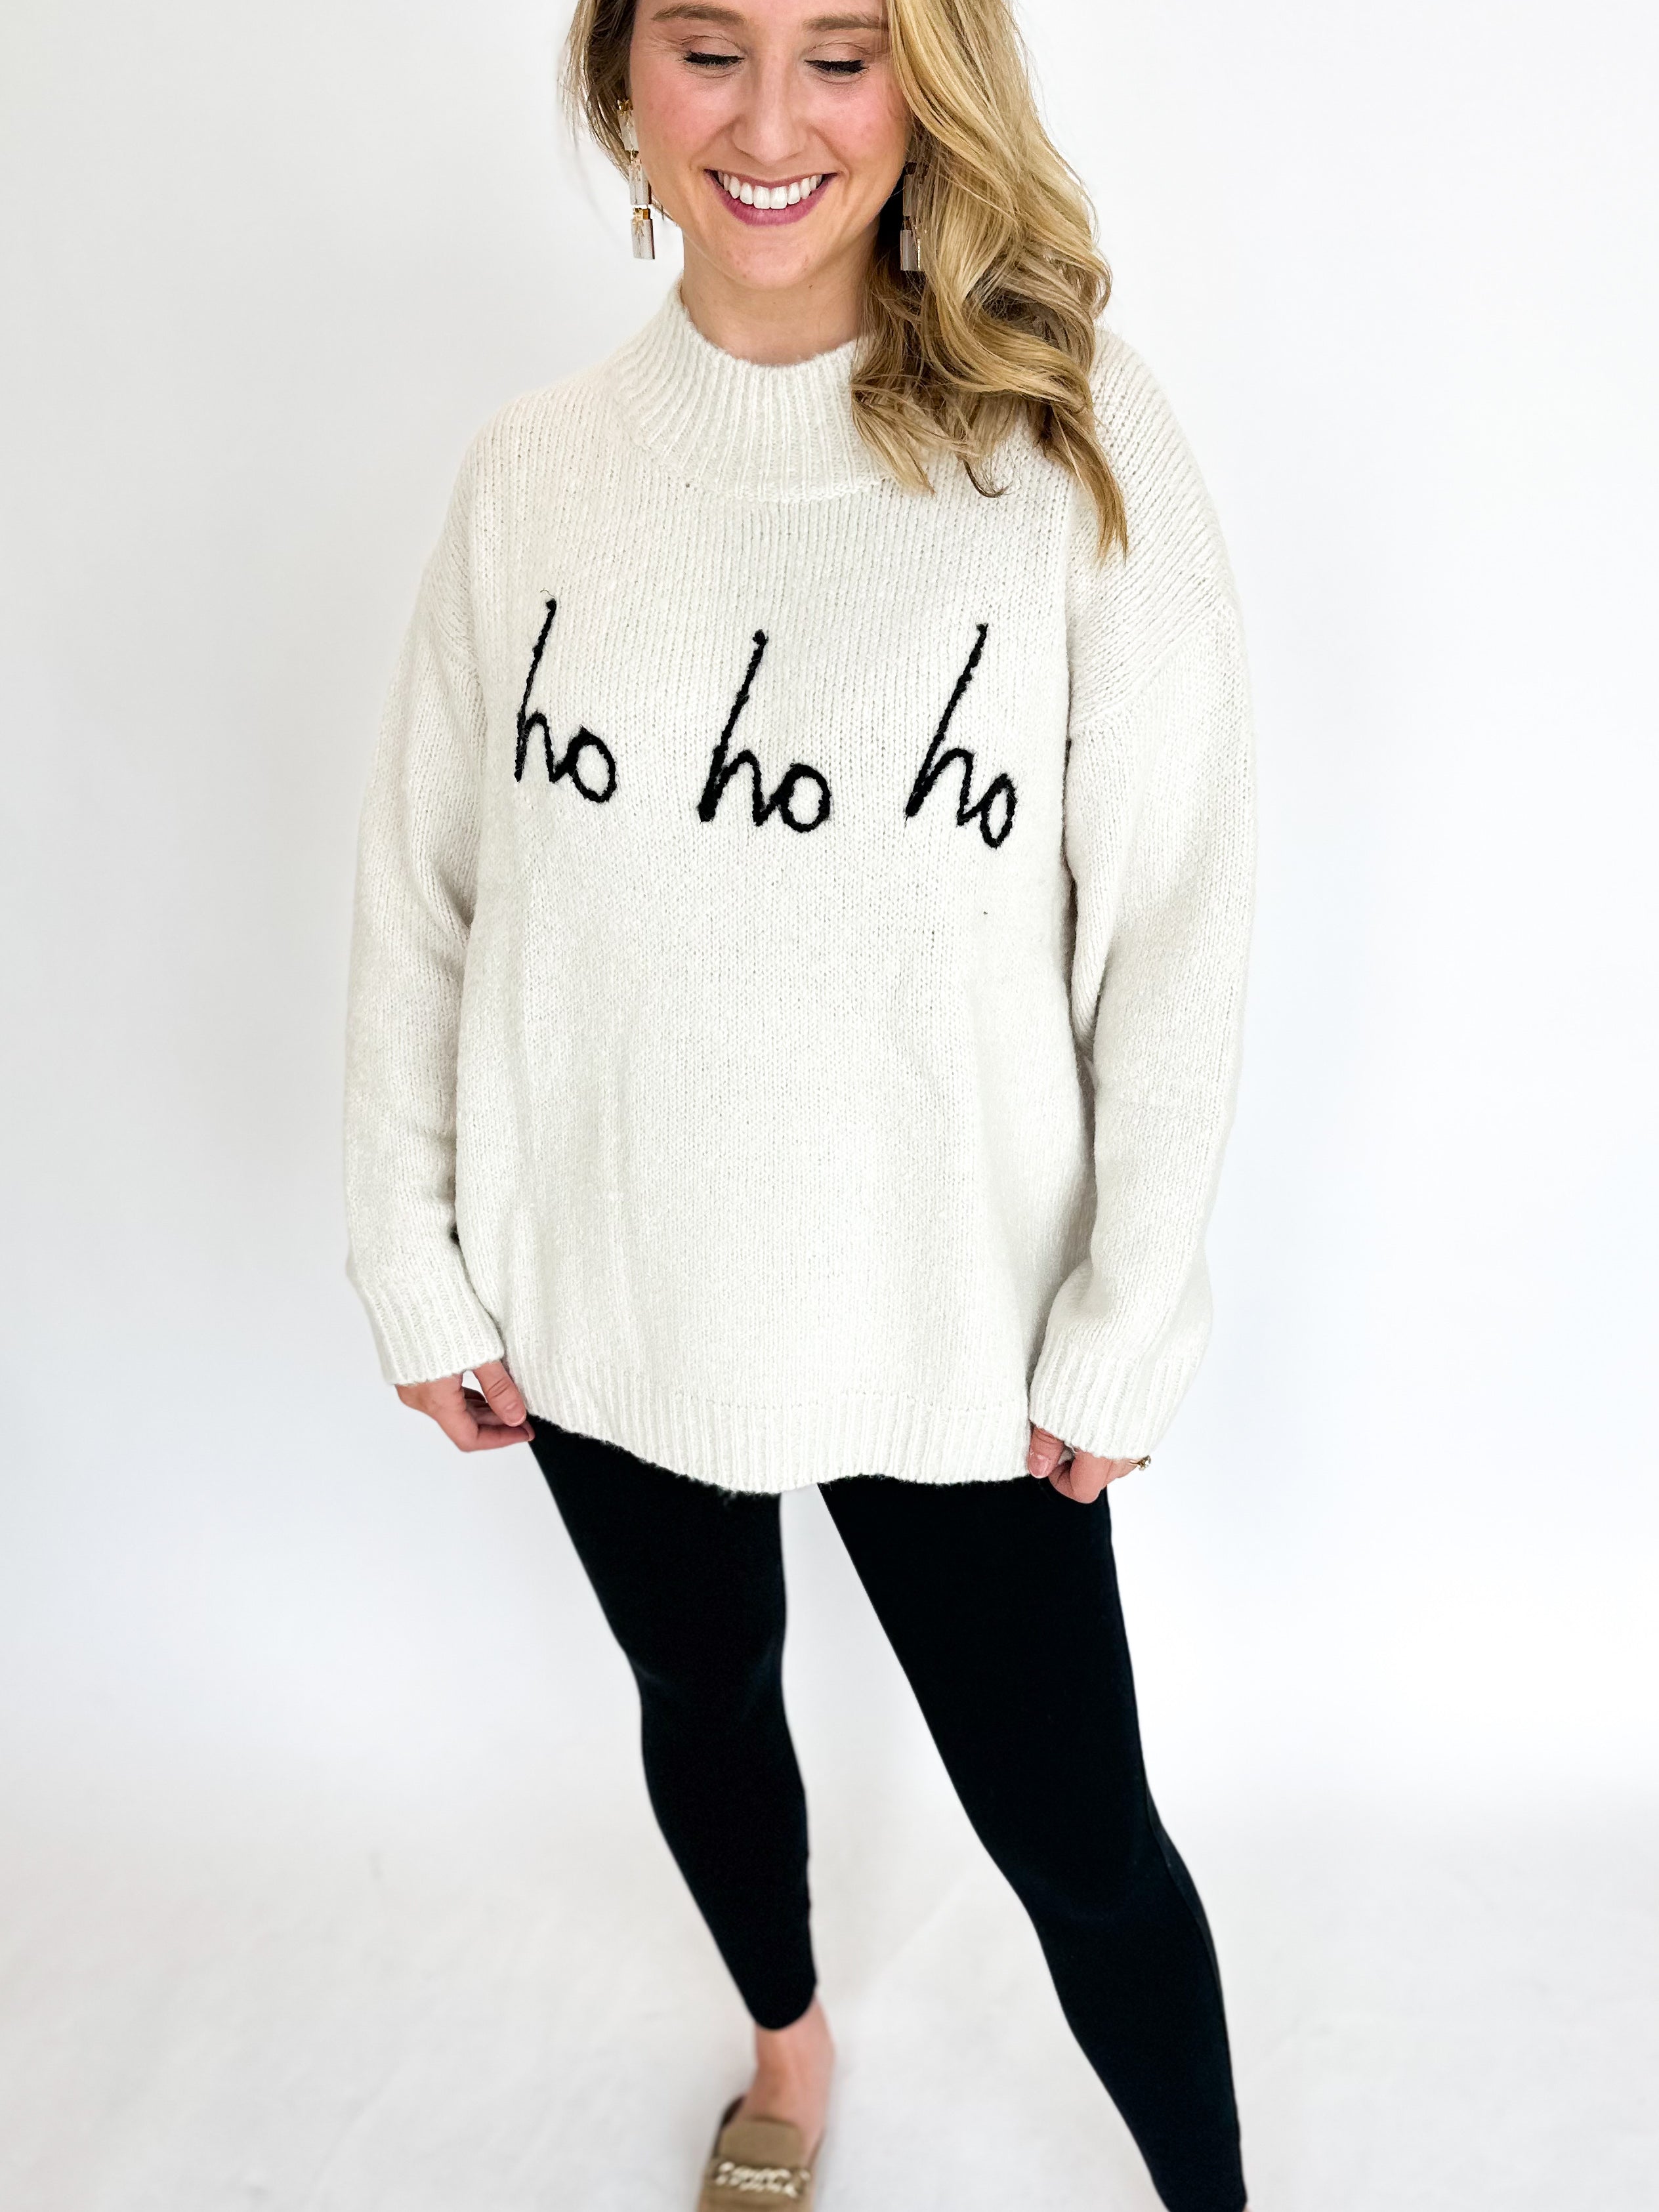 Vintage HO HO HO Sweater Top-230 Sweaters/Cardis-GILLI CLOTHING-July & June Women's Fashion Boutique Located in San Antonio, Texas